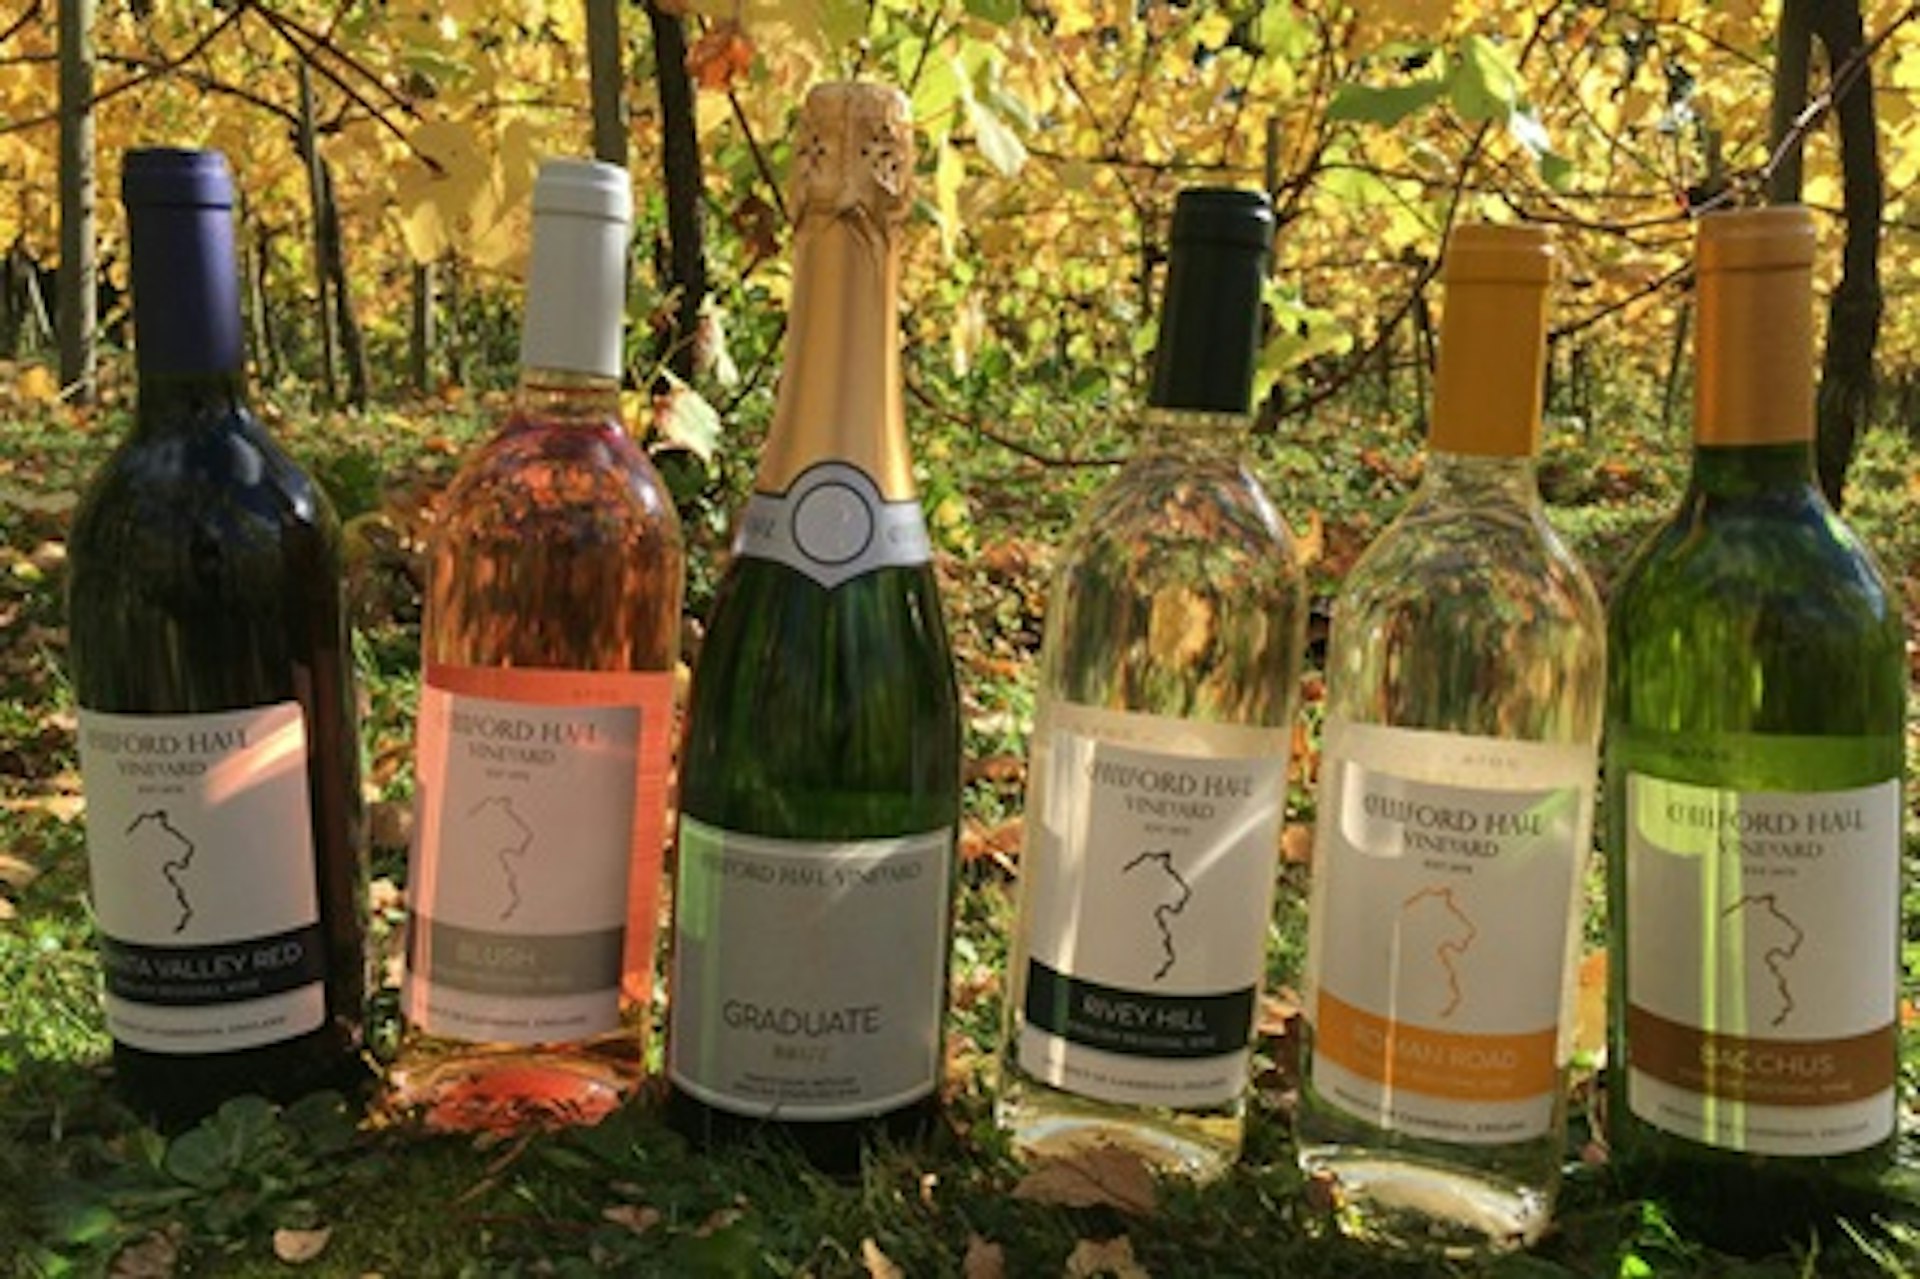 Tour and Tasting with Lunch for Two at Chilford Hall Vineyard 4